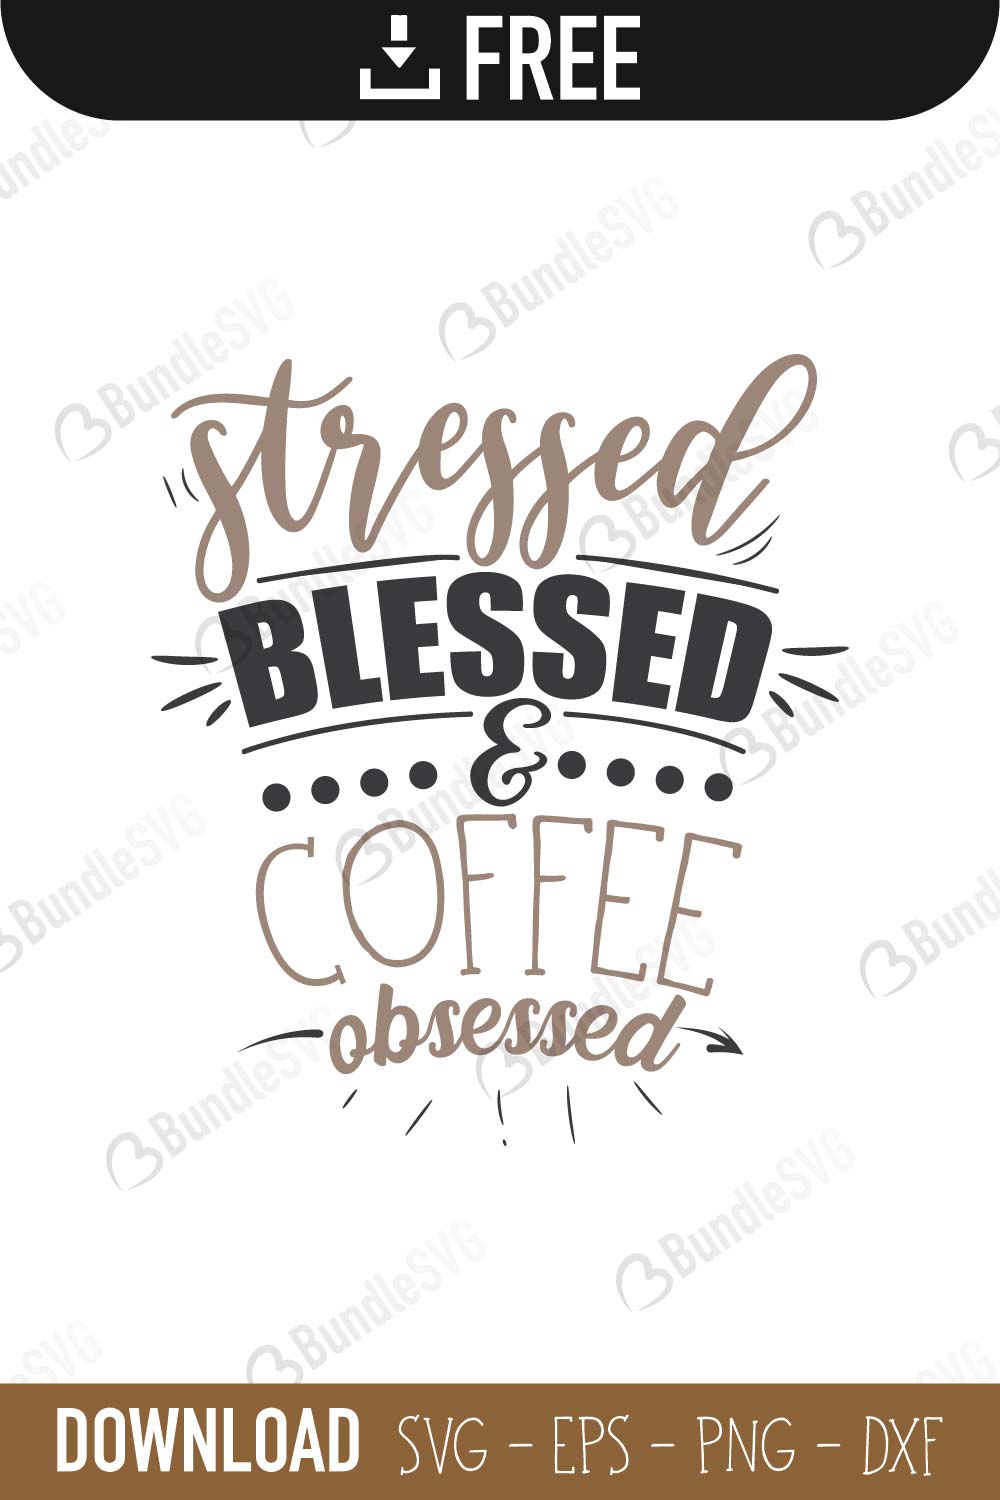 Download View Free Svg Coffee Sayings Background Free Svg Files Silhouette And Cricut Cutting Files